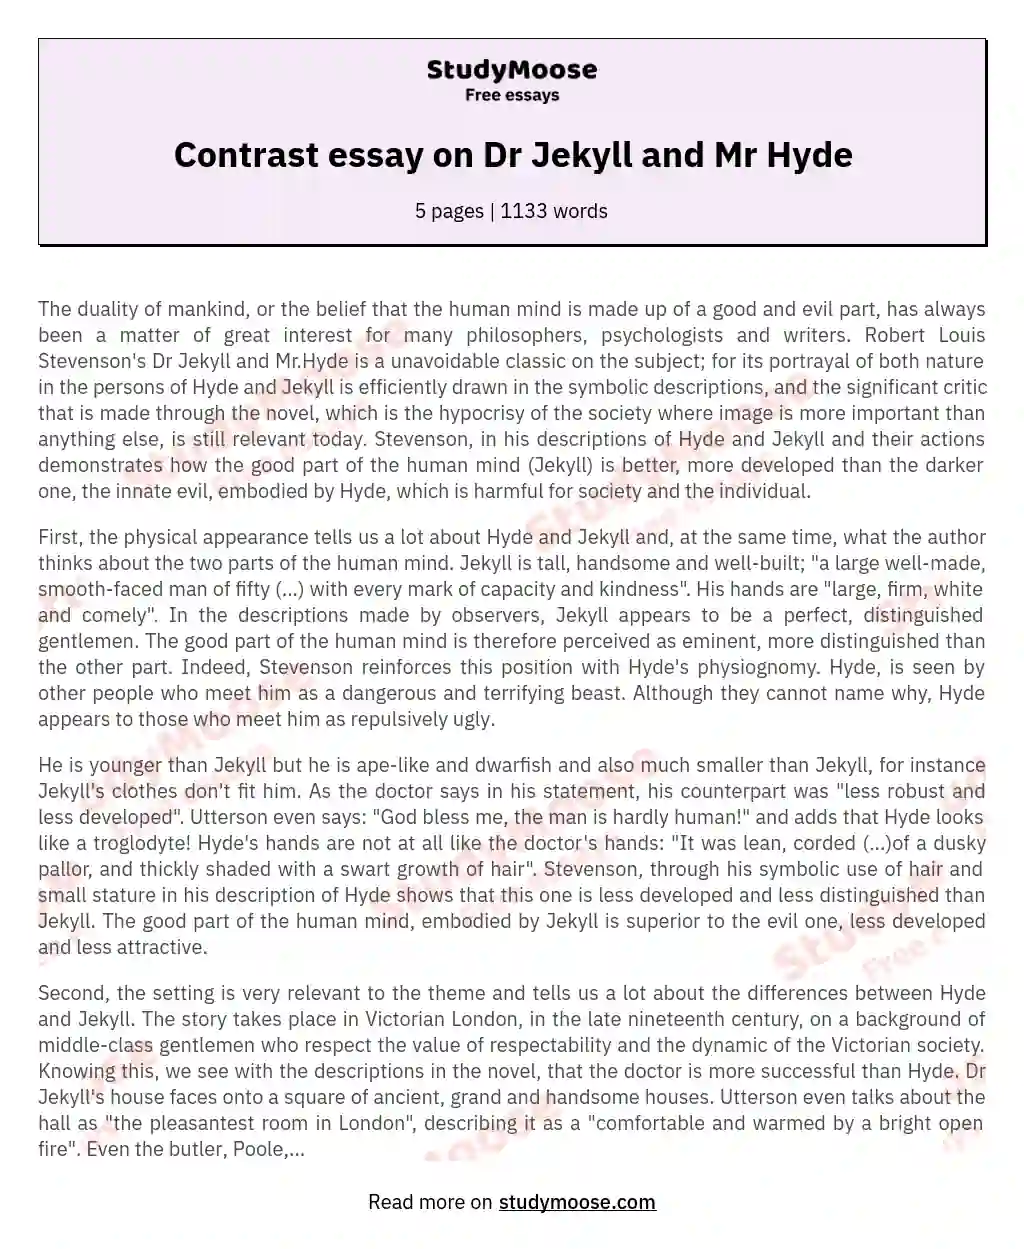 Contrast essay on Dr Jekyll and Mr Hyde essay